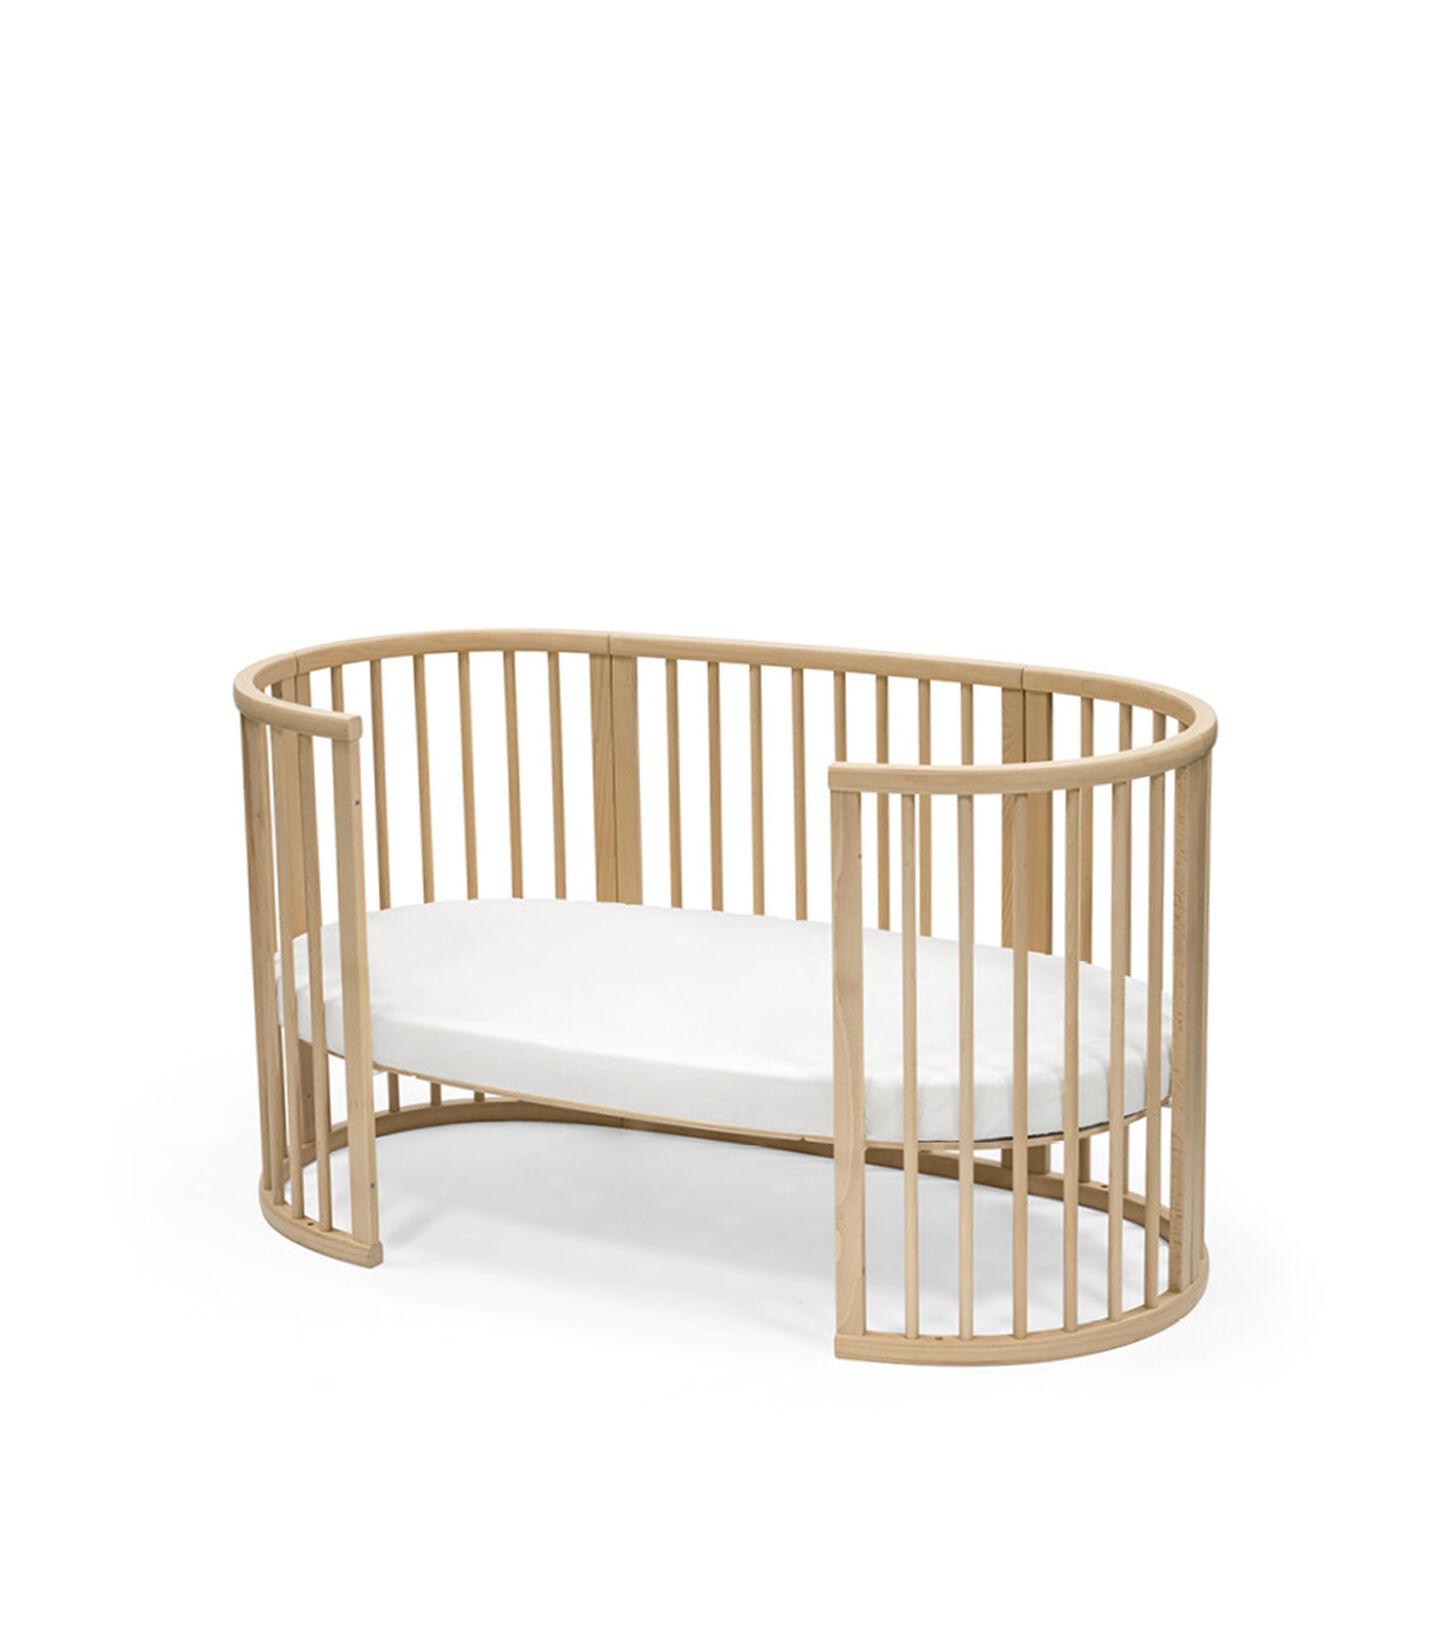 Stokke® Sleepi™ Bed, Natural. With Mattress and Fitted Sheet White. Open. view 4